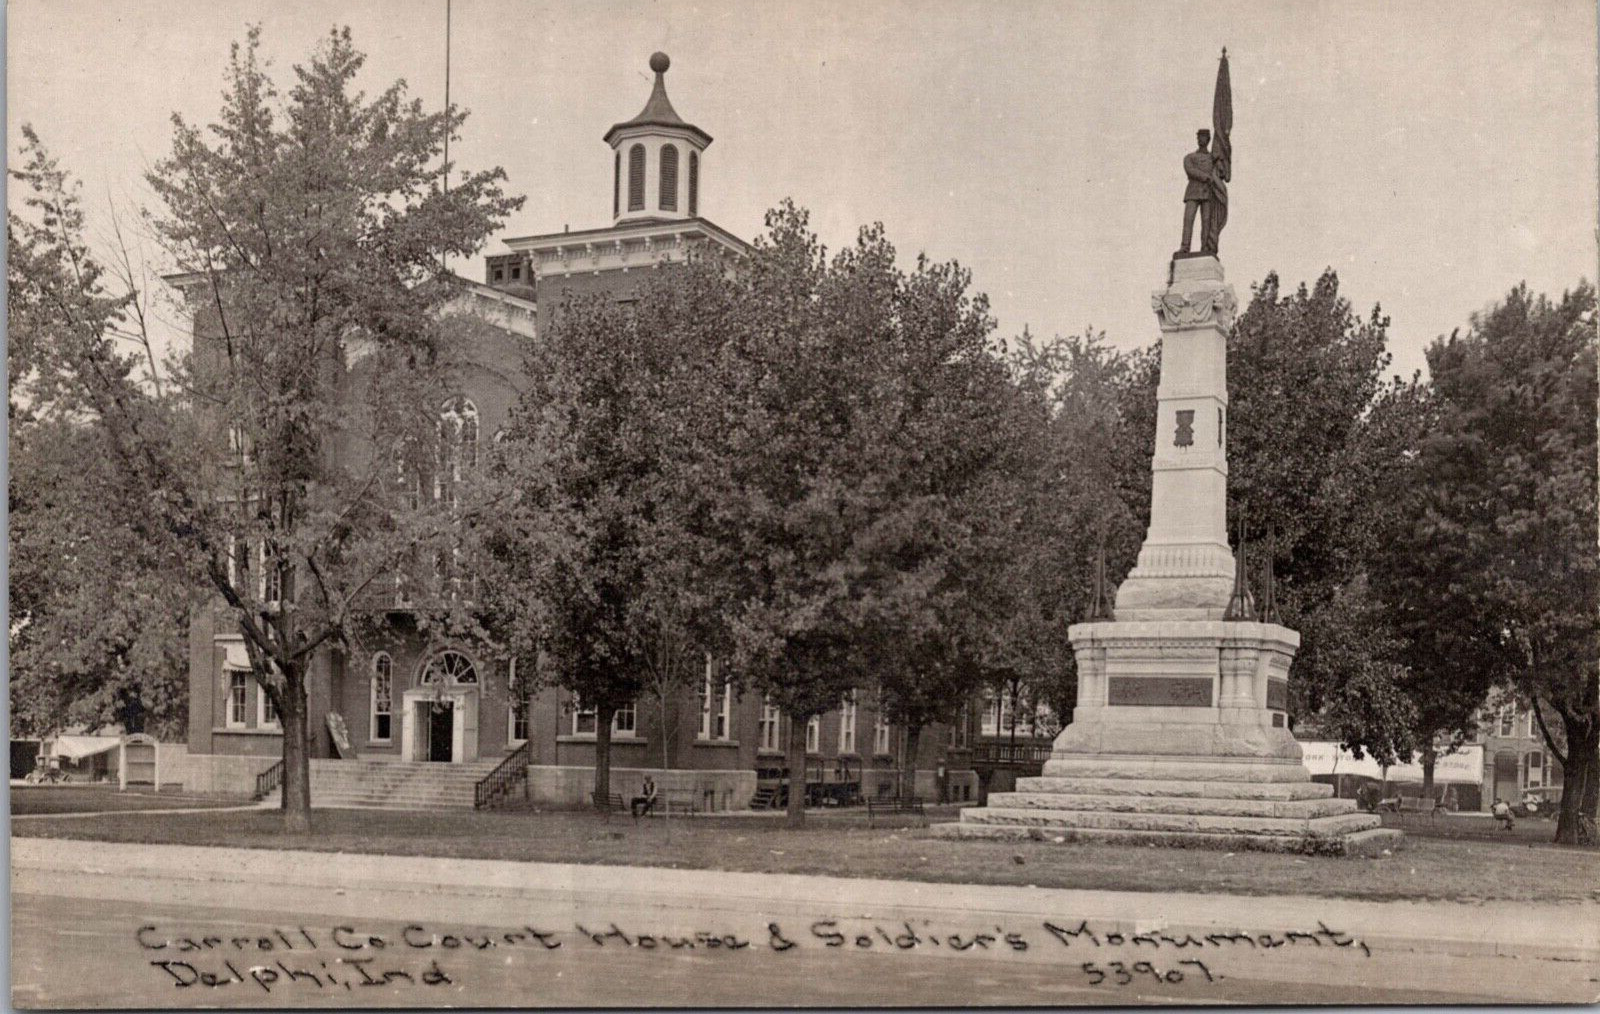 RPPC Carroll County Courthouse Soldier Sailors Monument Civil War Delphi Indiana